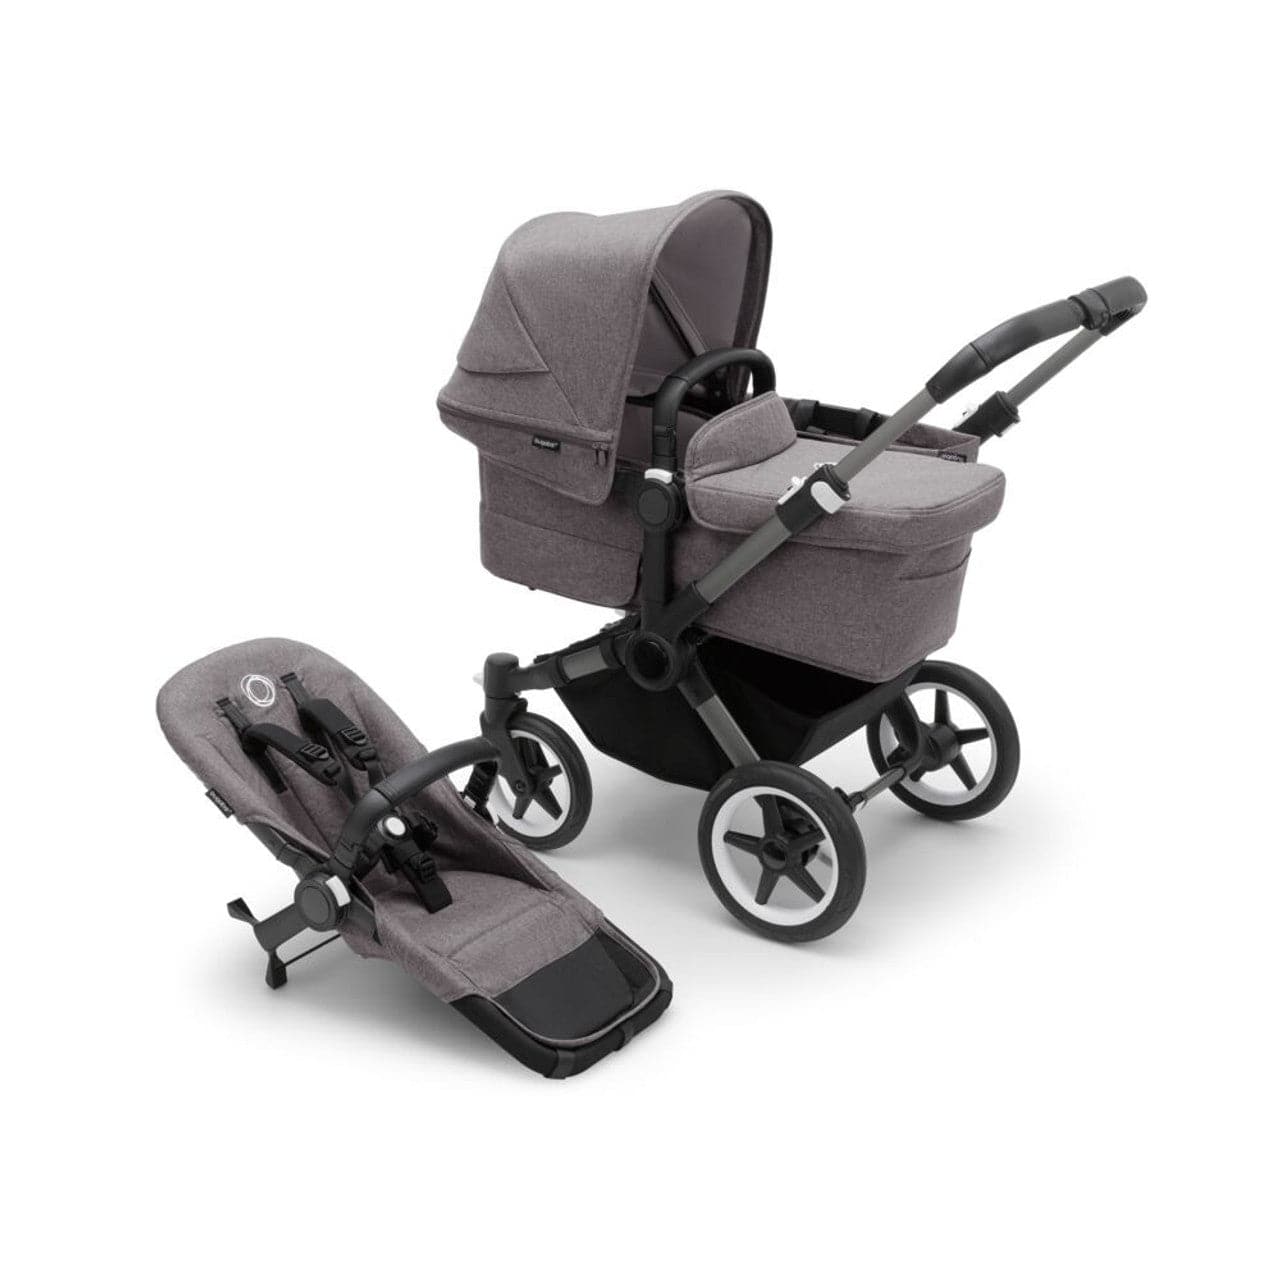 Bugaboo Donkey 5 Twin Complete Travel System + Turtle Air - Graphite/Grey Melange - For Your Little One